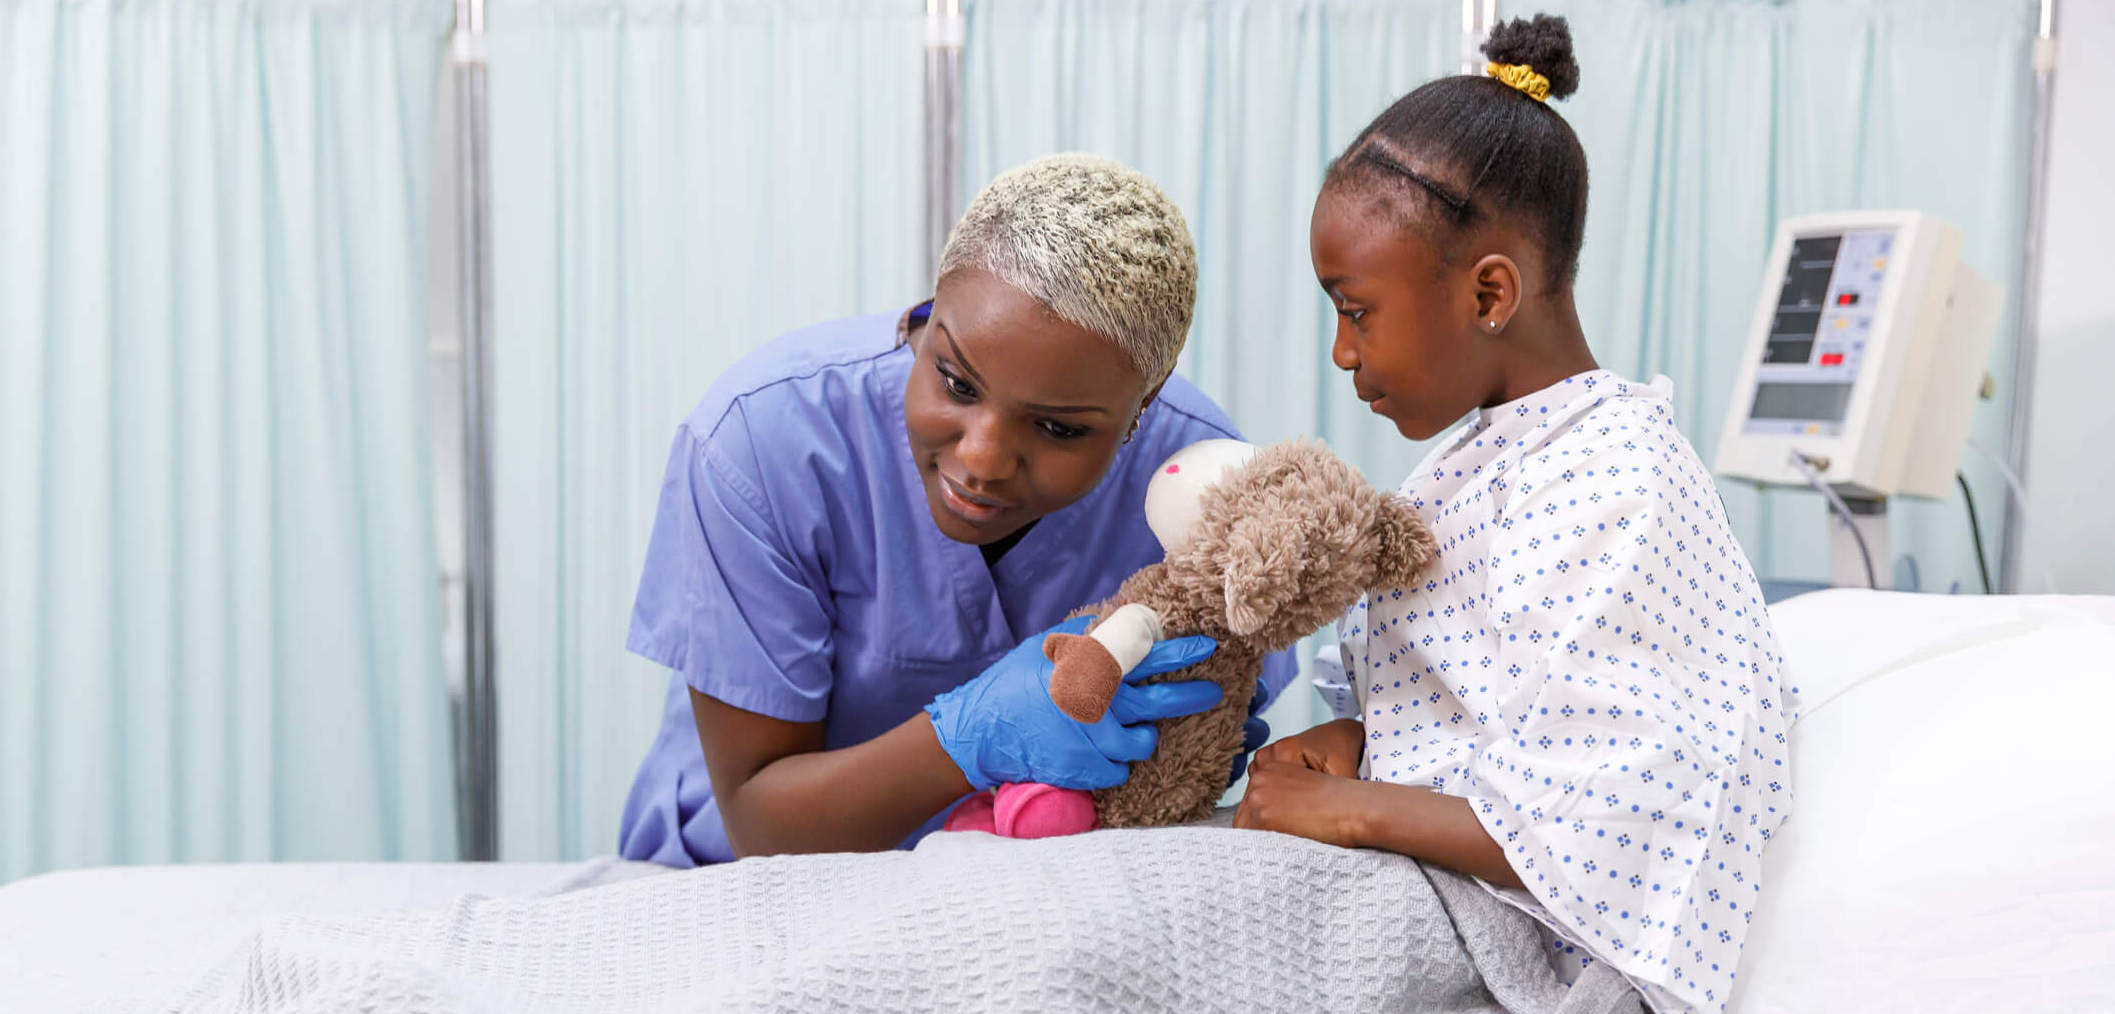 5 Things to Say to Patients, Caregivers Besides 'I'm Sorry